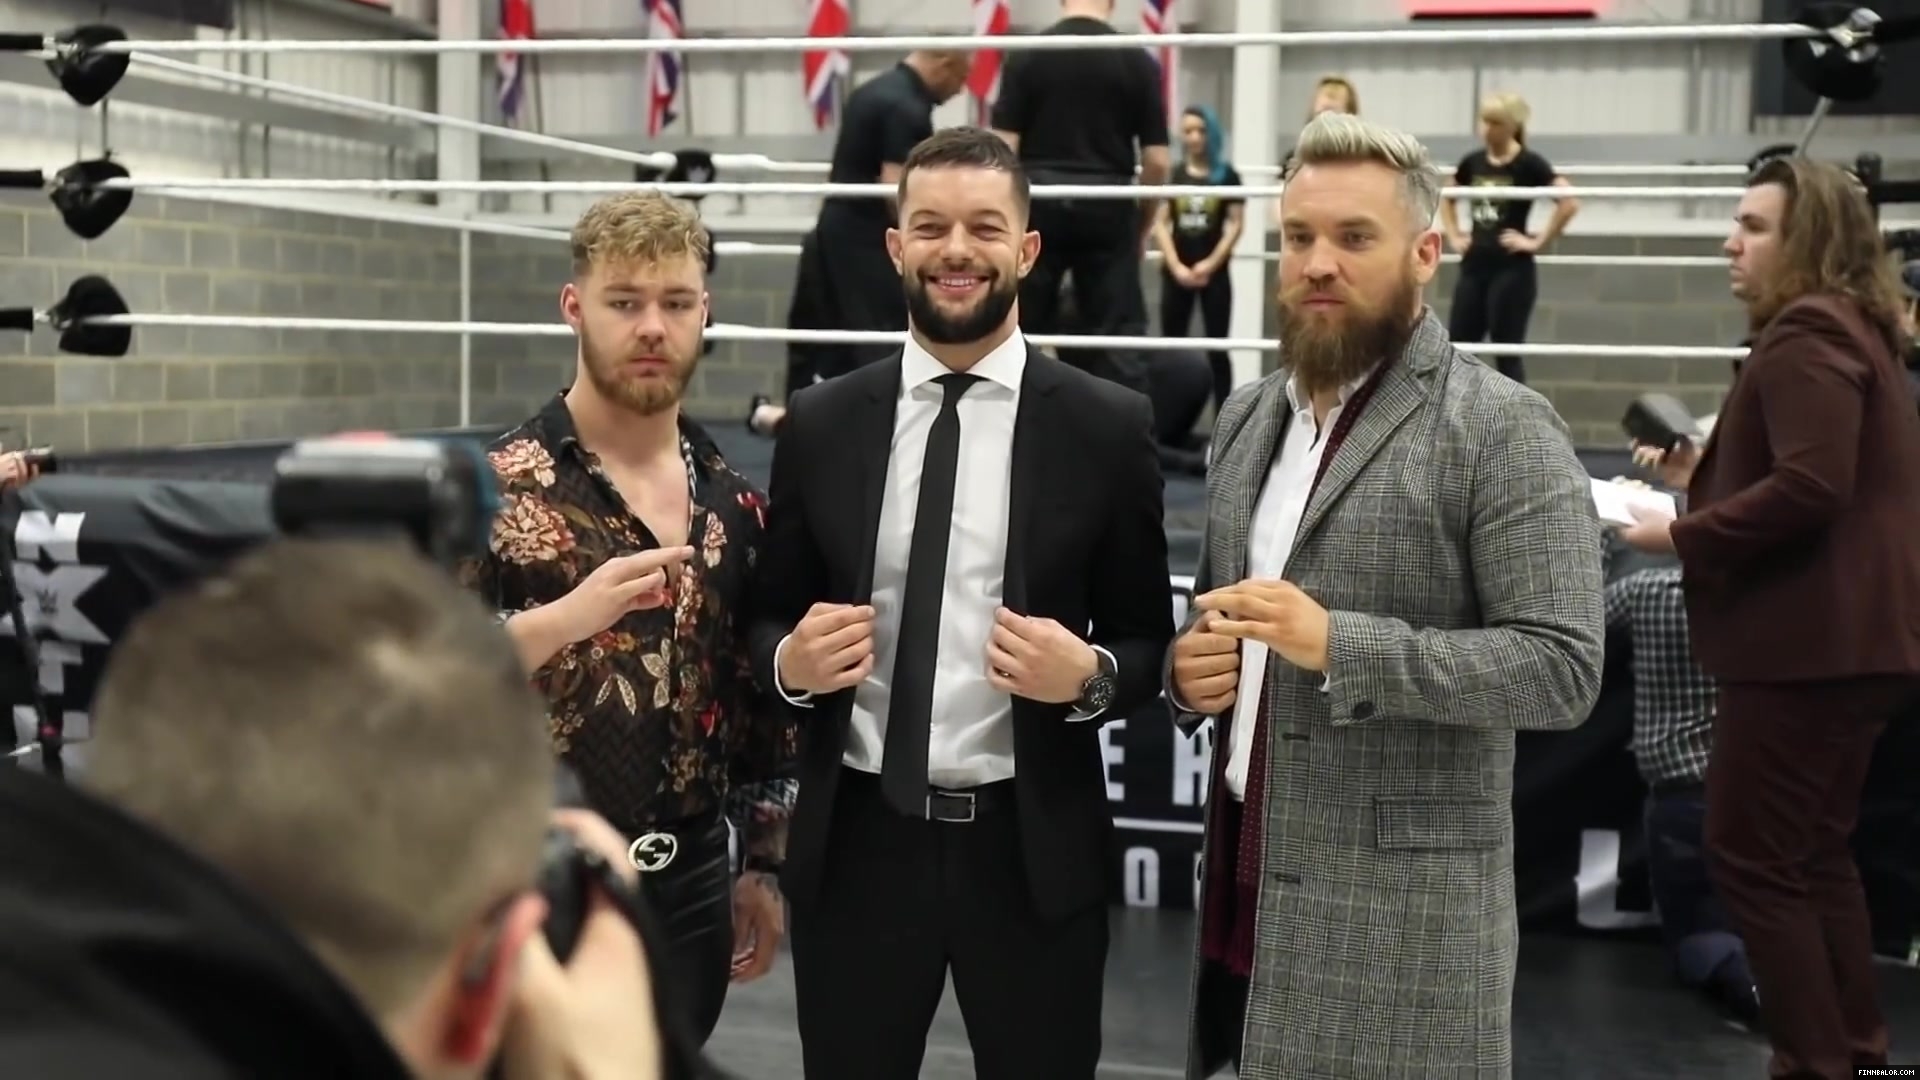 WWE_Superstar_FINN_BALOR_joins_MOUSTACHE_MOUNTAIN_at_the_opening_of_the_NXT_UK_PC_039.jpg